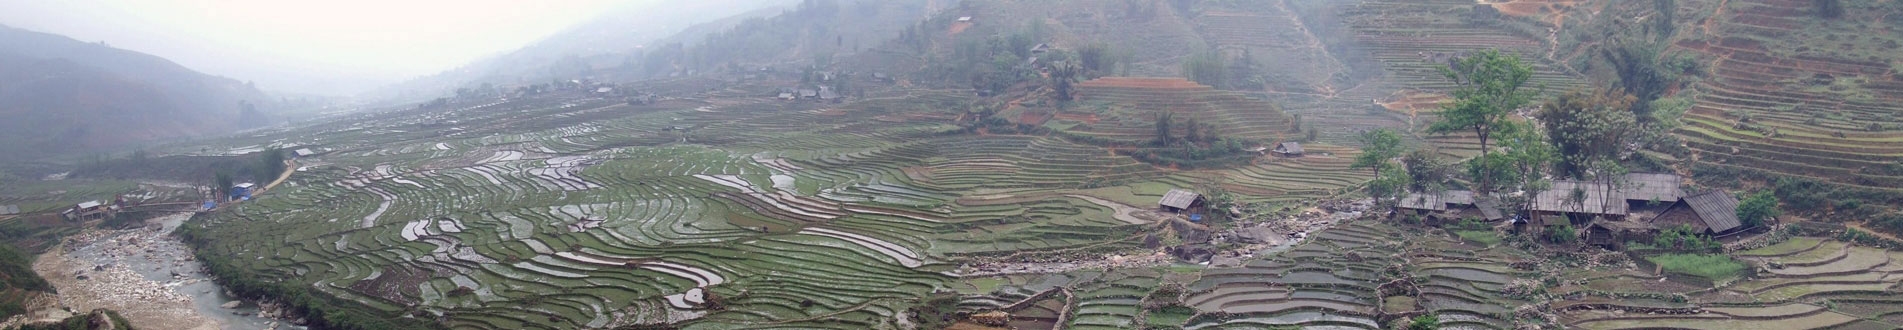 Great view of muong hao valley - Get a private tour guide